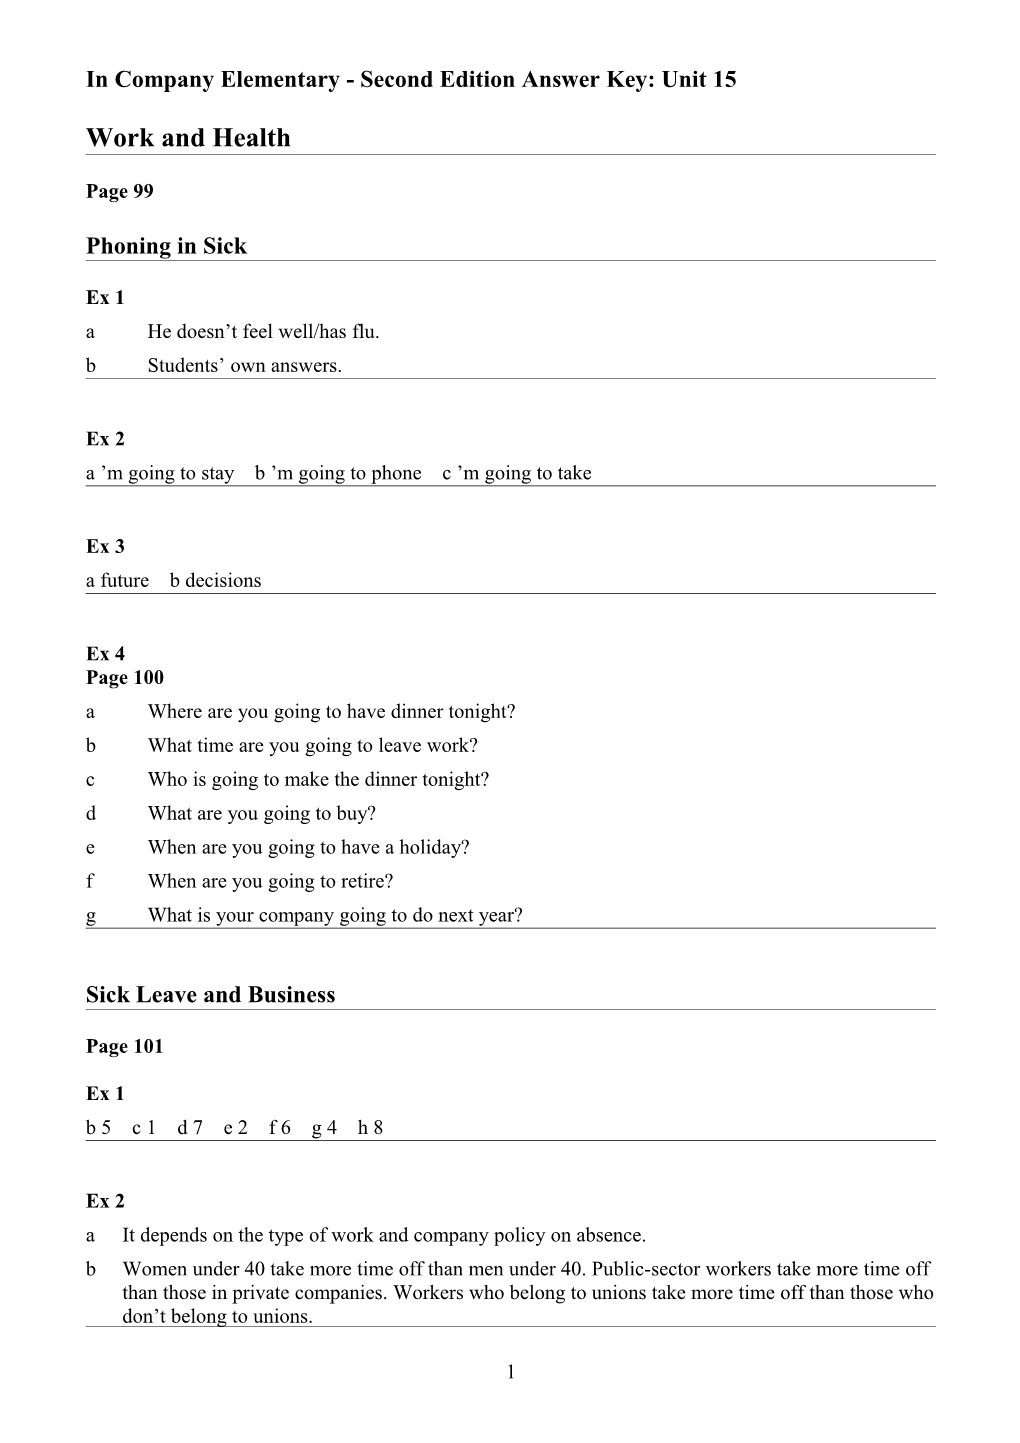 In Company Elementary Second Edition Answer Key: Unit 15